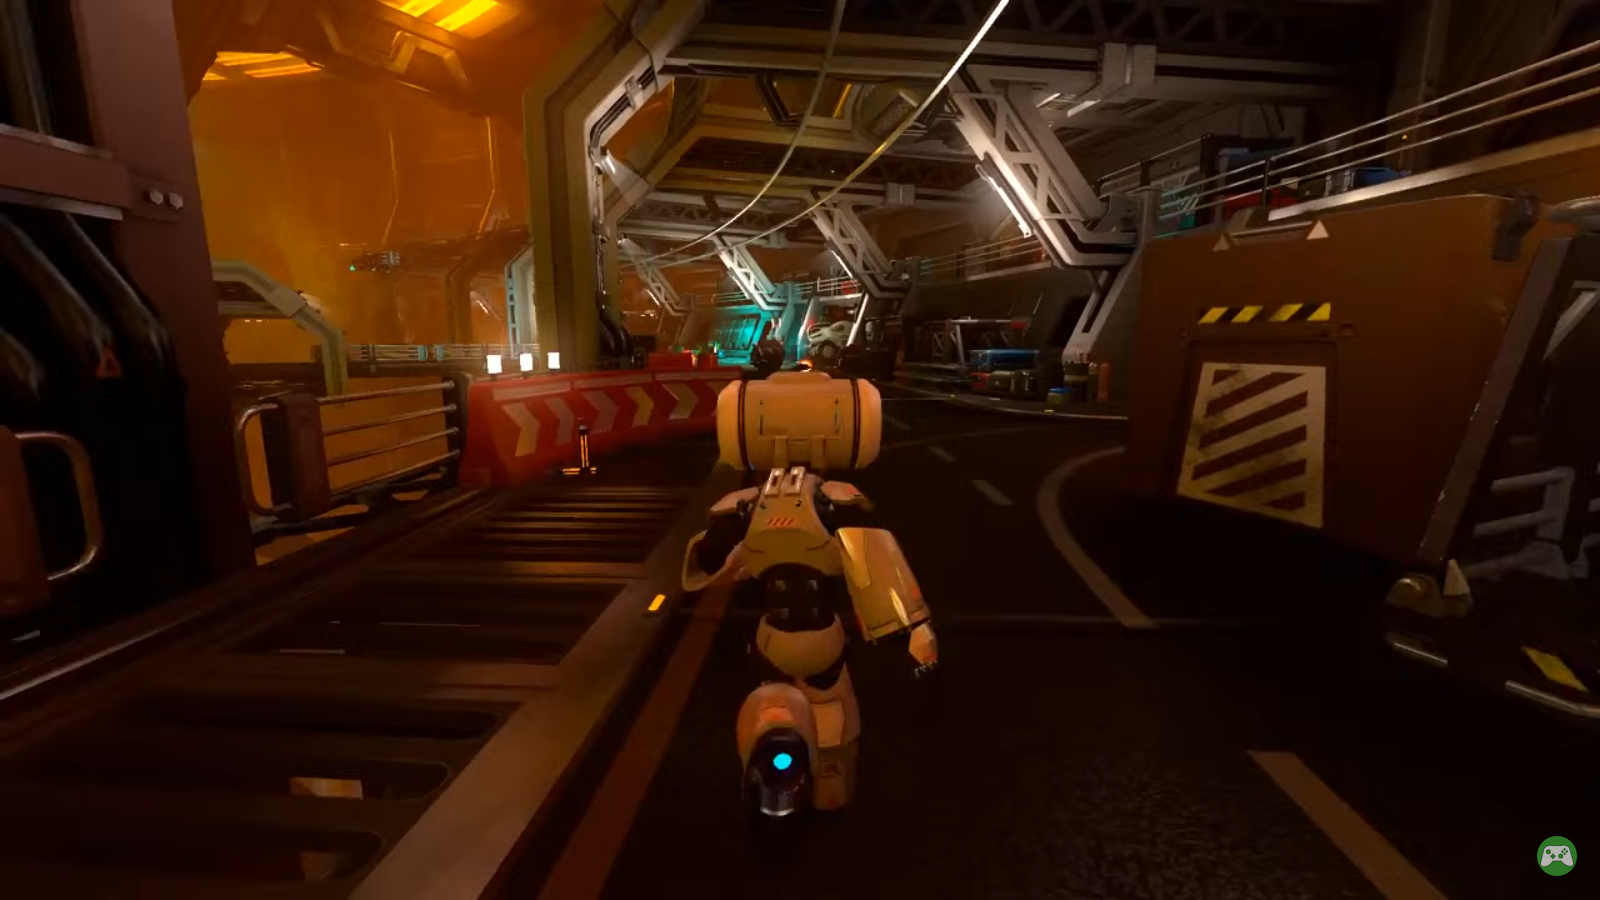 Space X Robo Game is free on Itch.io for a limited time